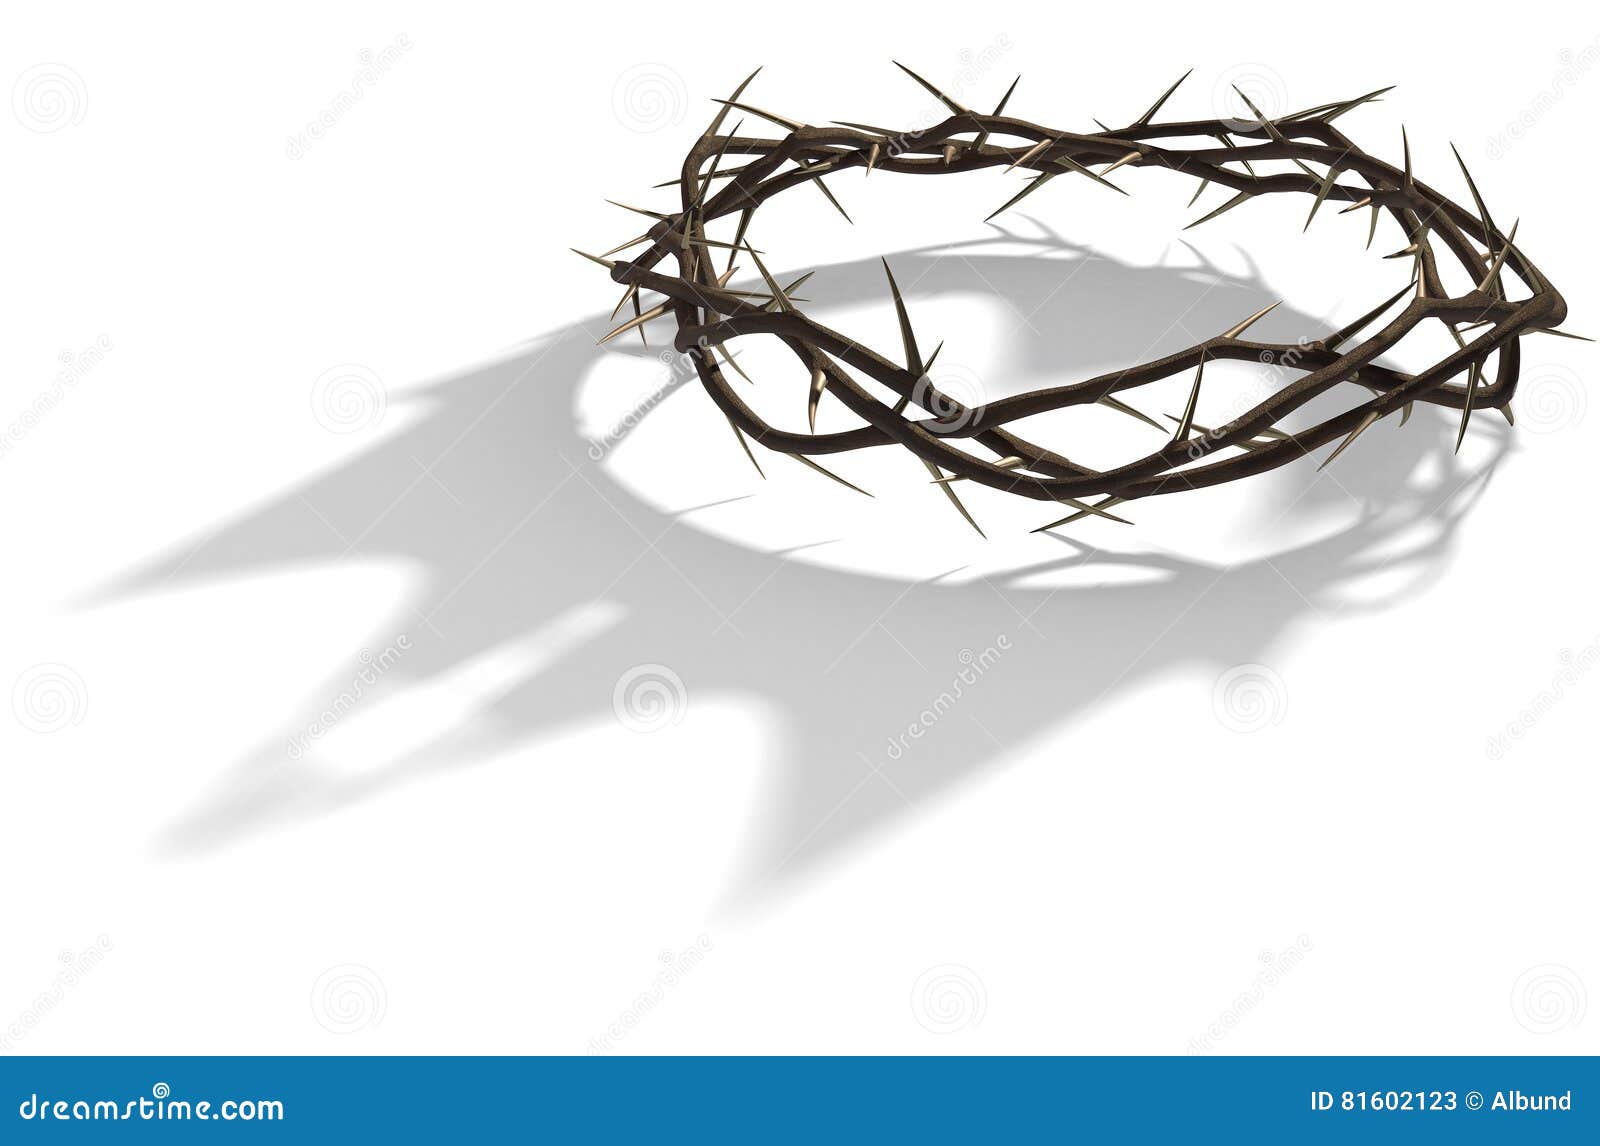 crown of thorns with royal shadow